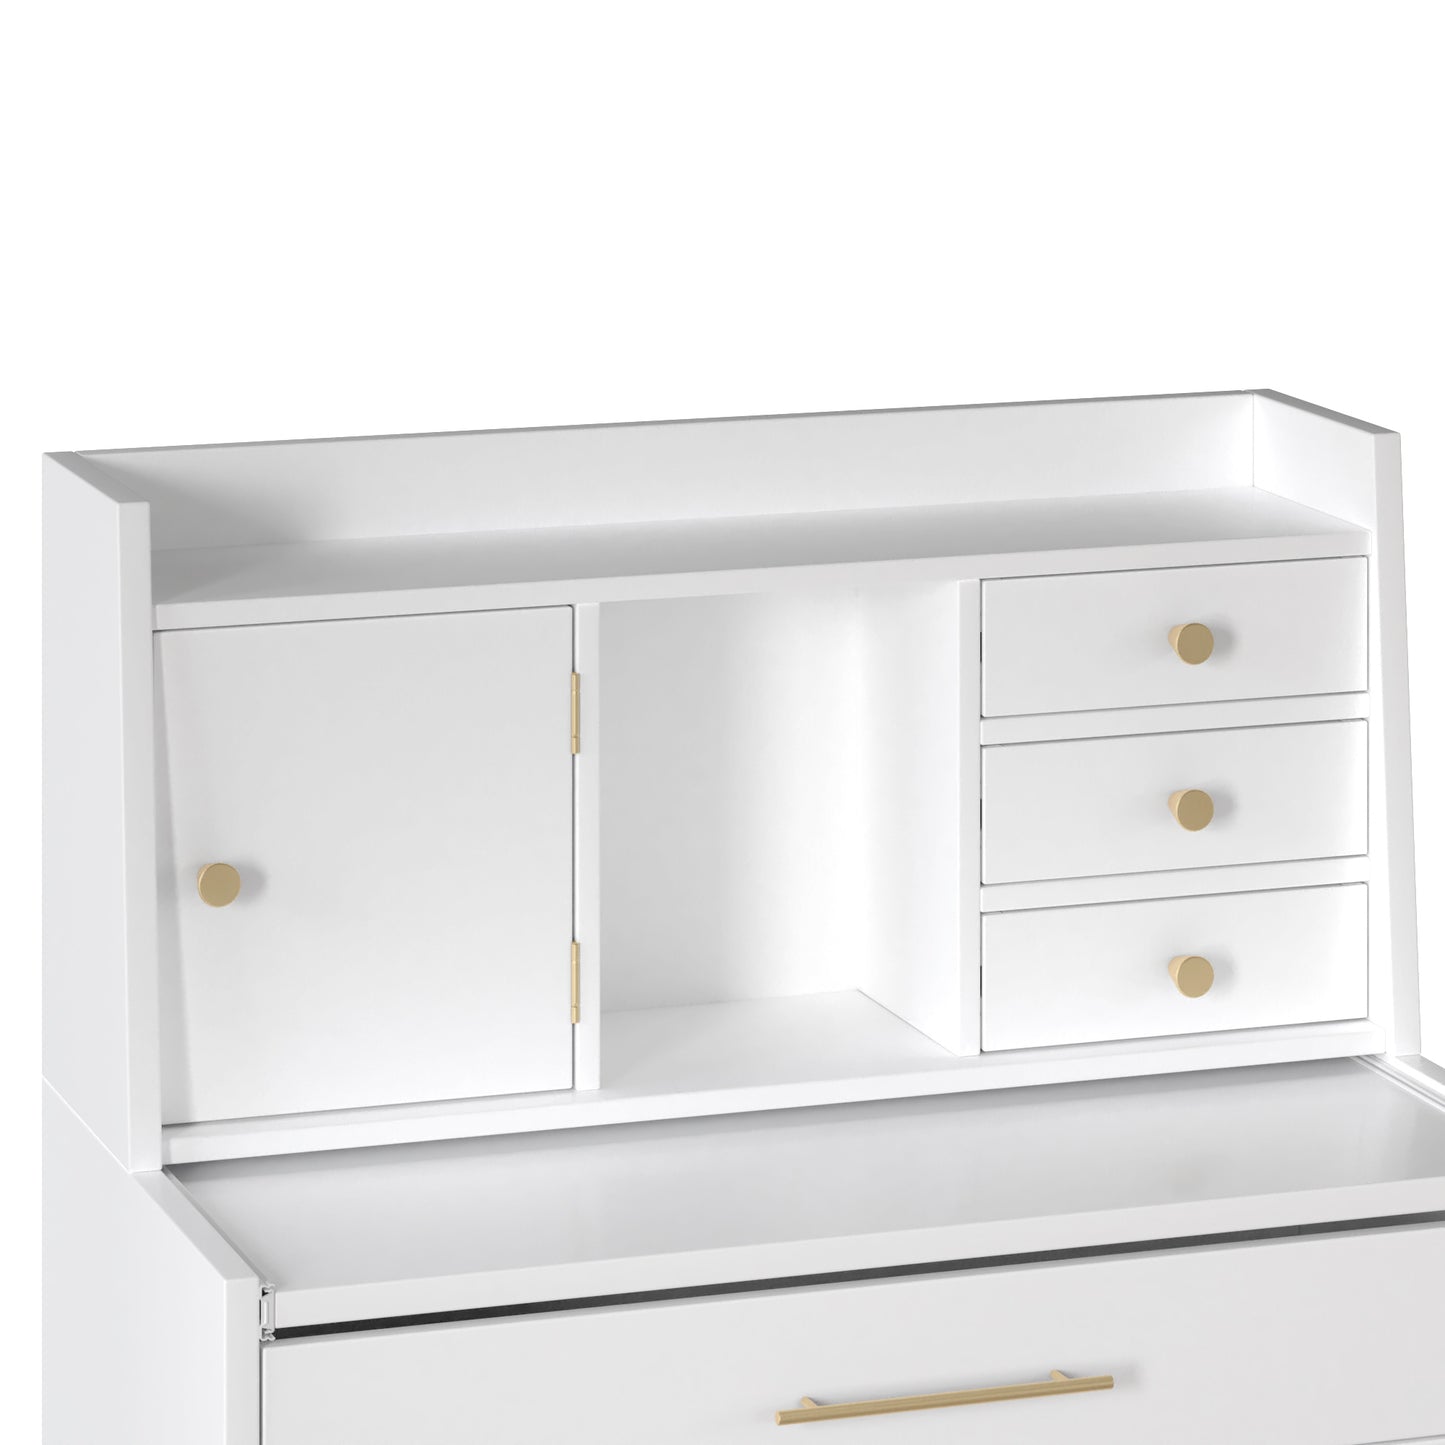 Vanity Makeup Table with Mirror and Retractable Table, Storage Dresser for Bedroom with 7 Drawers and Hidden Storage,White